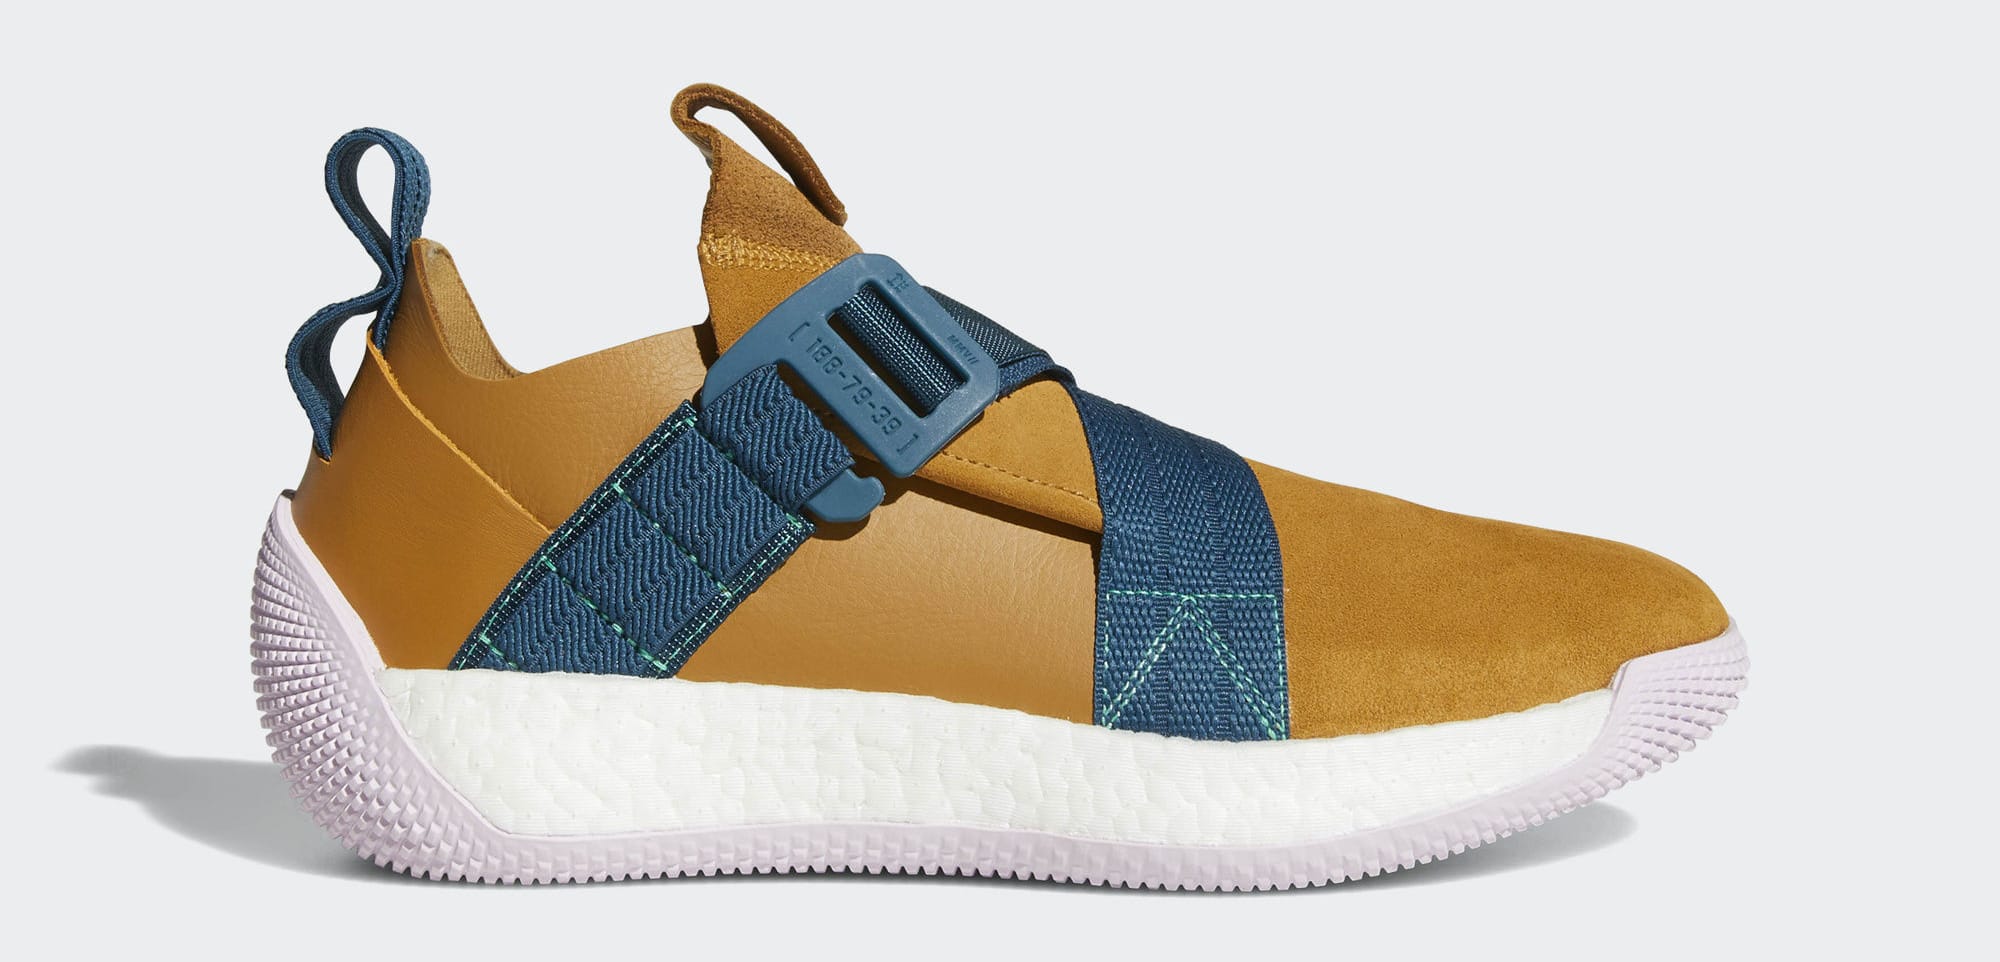 Adidas Harden LS 2 Buckle Brown/Blue AQ0021 (Lateral)